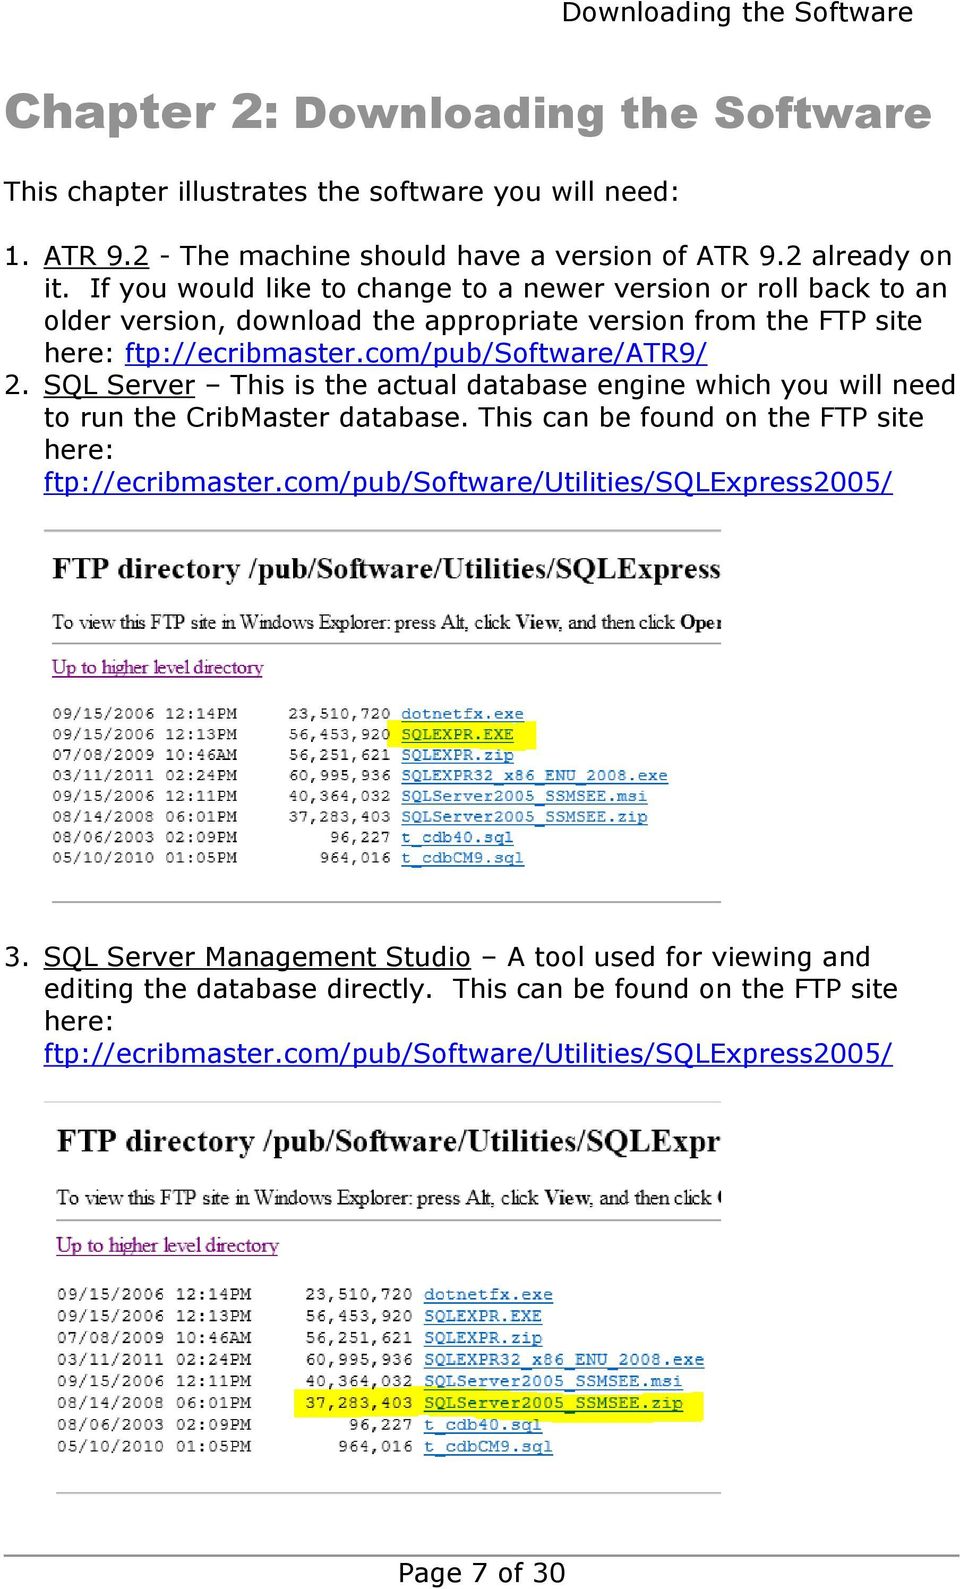 SQL Server This is the actual database engine which you will need to run the CribMaster database. This can be found on the FTP site here: ftp://ecribmaster.